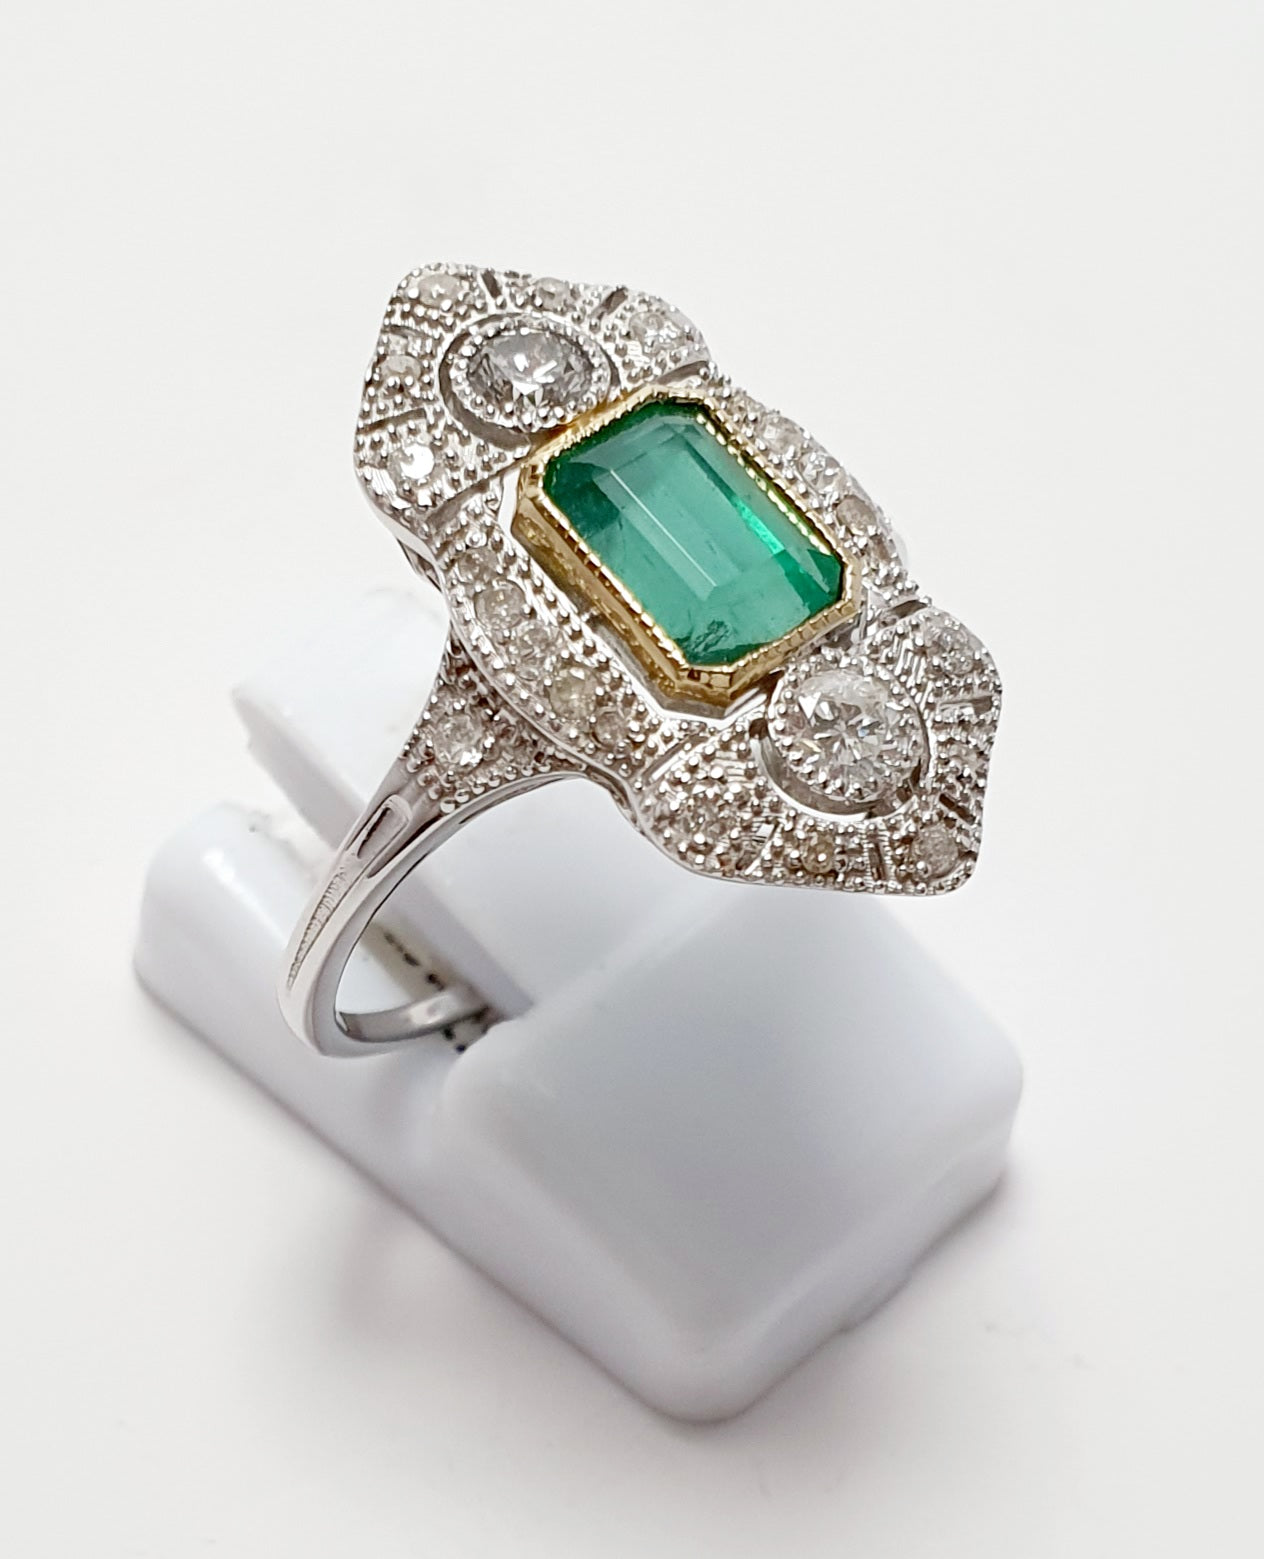 18Ct White Gold Art Deco Style Ring, Natural Emerald 1.40Ct & Dia 0.45Ct Ring